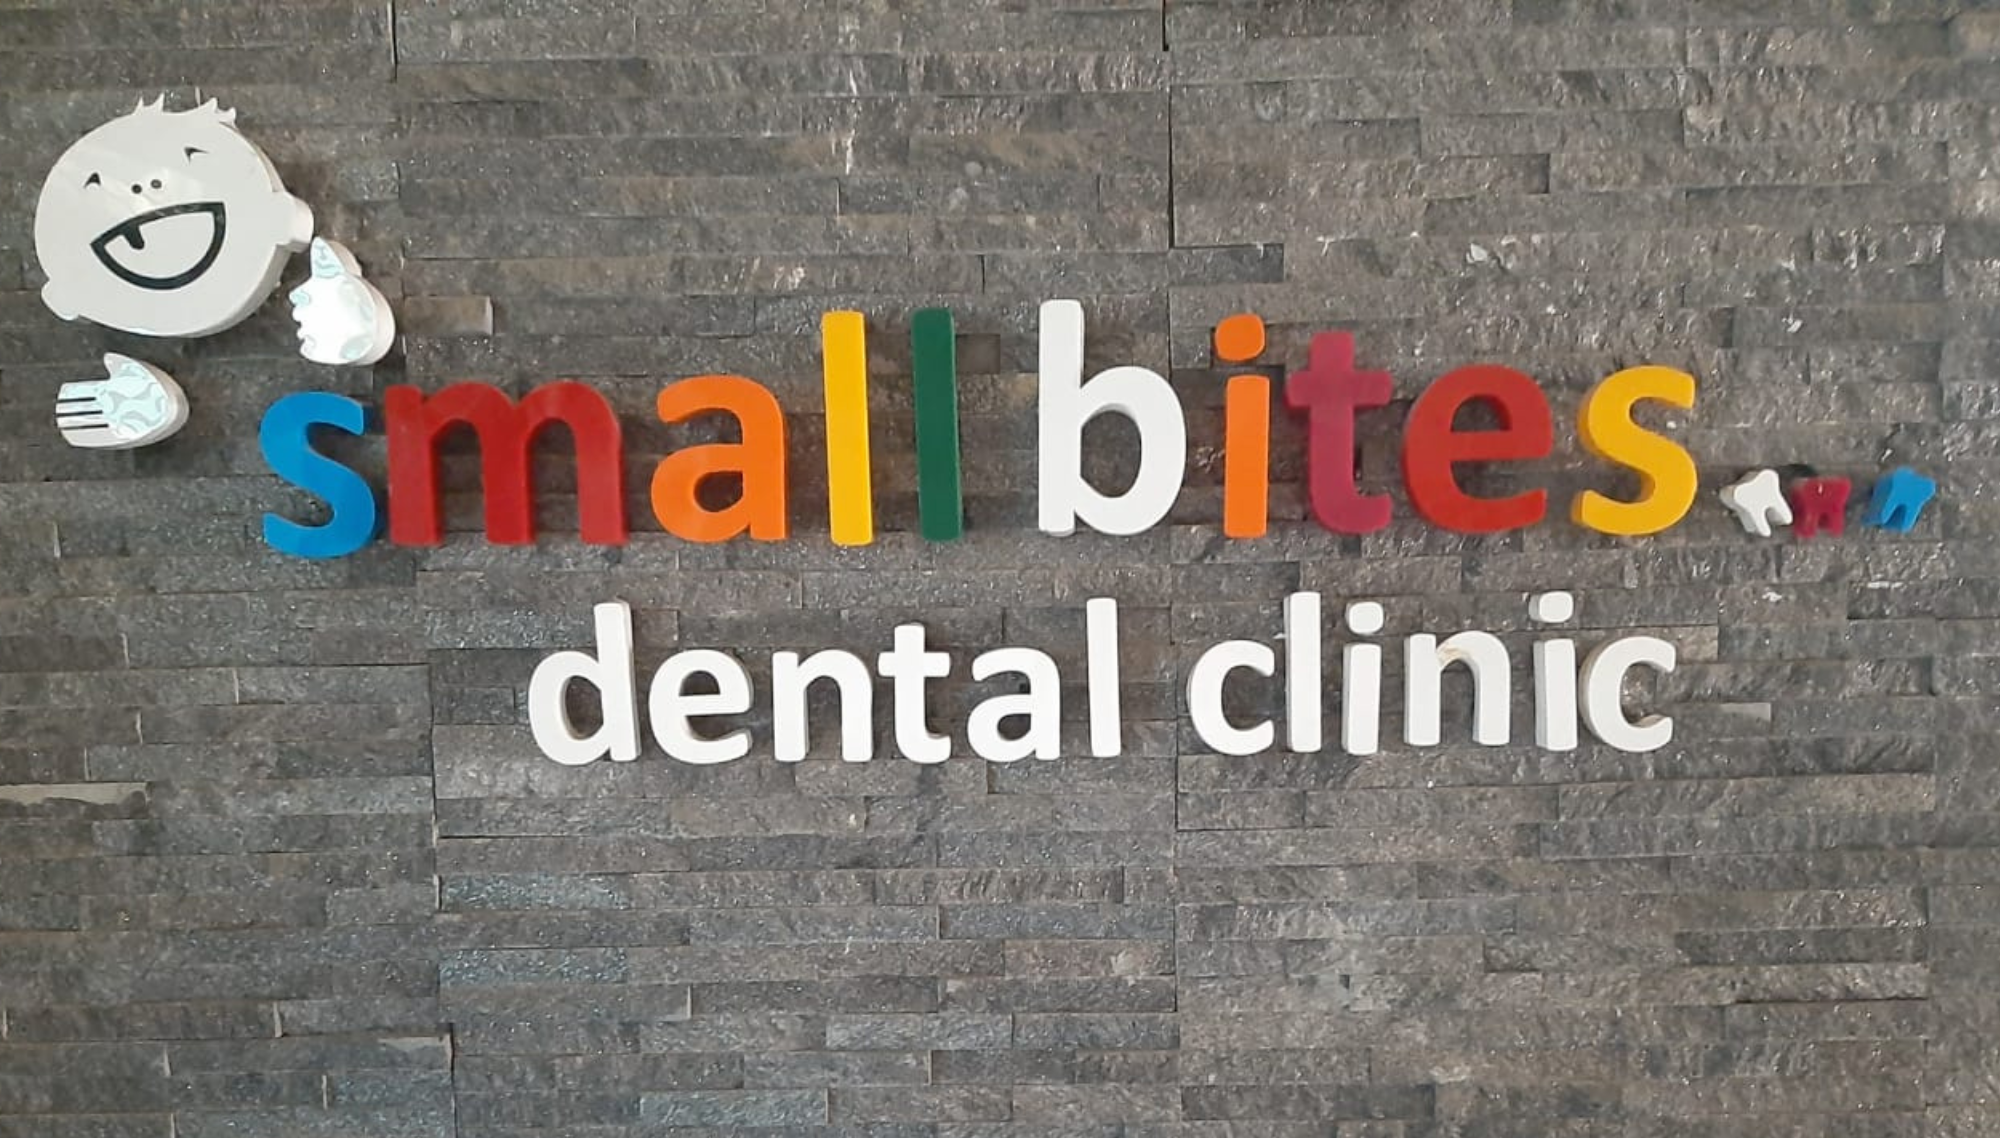 Our Happy Customer @ Small bites Dental clinic